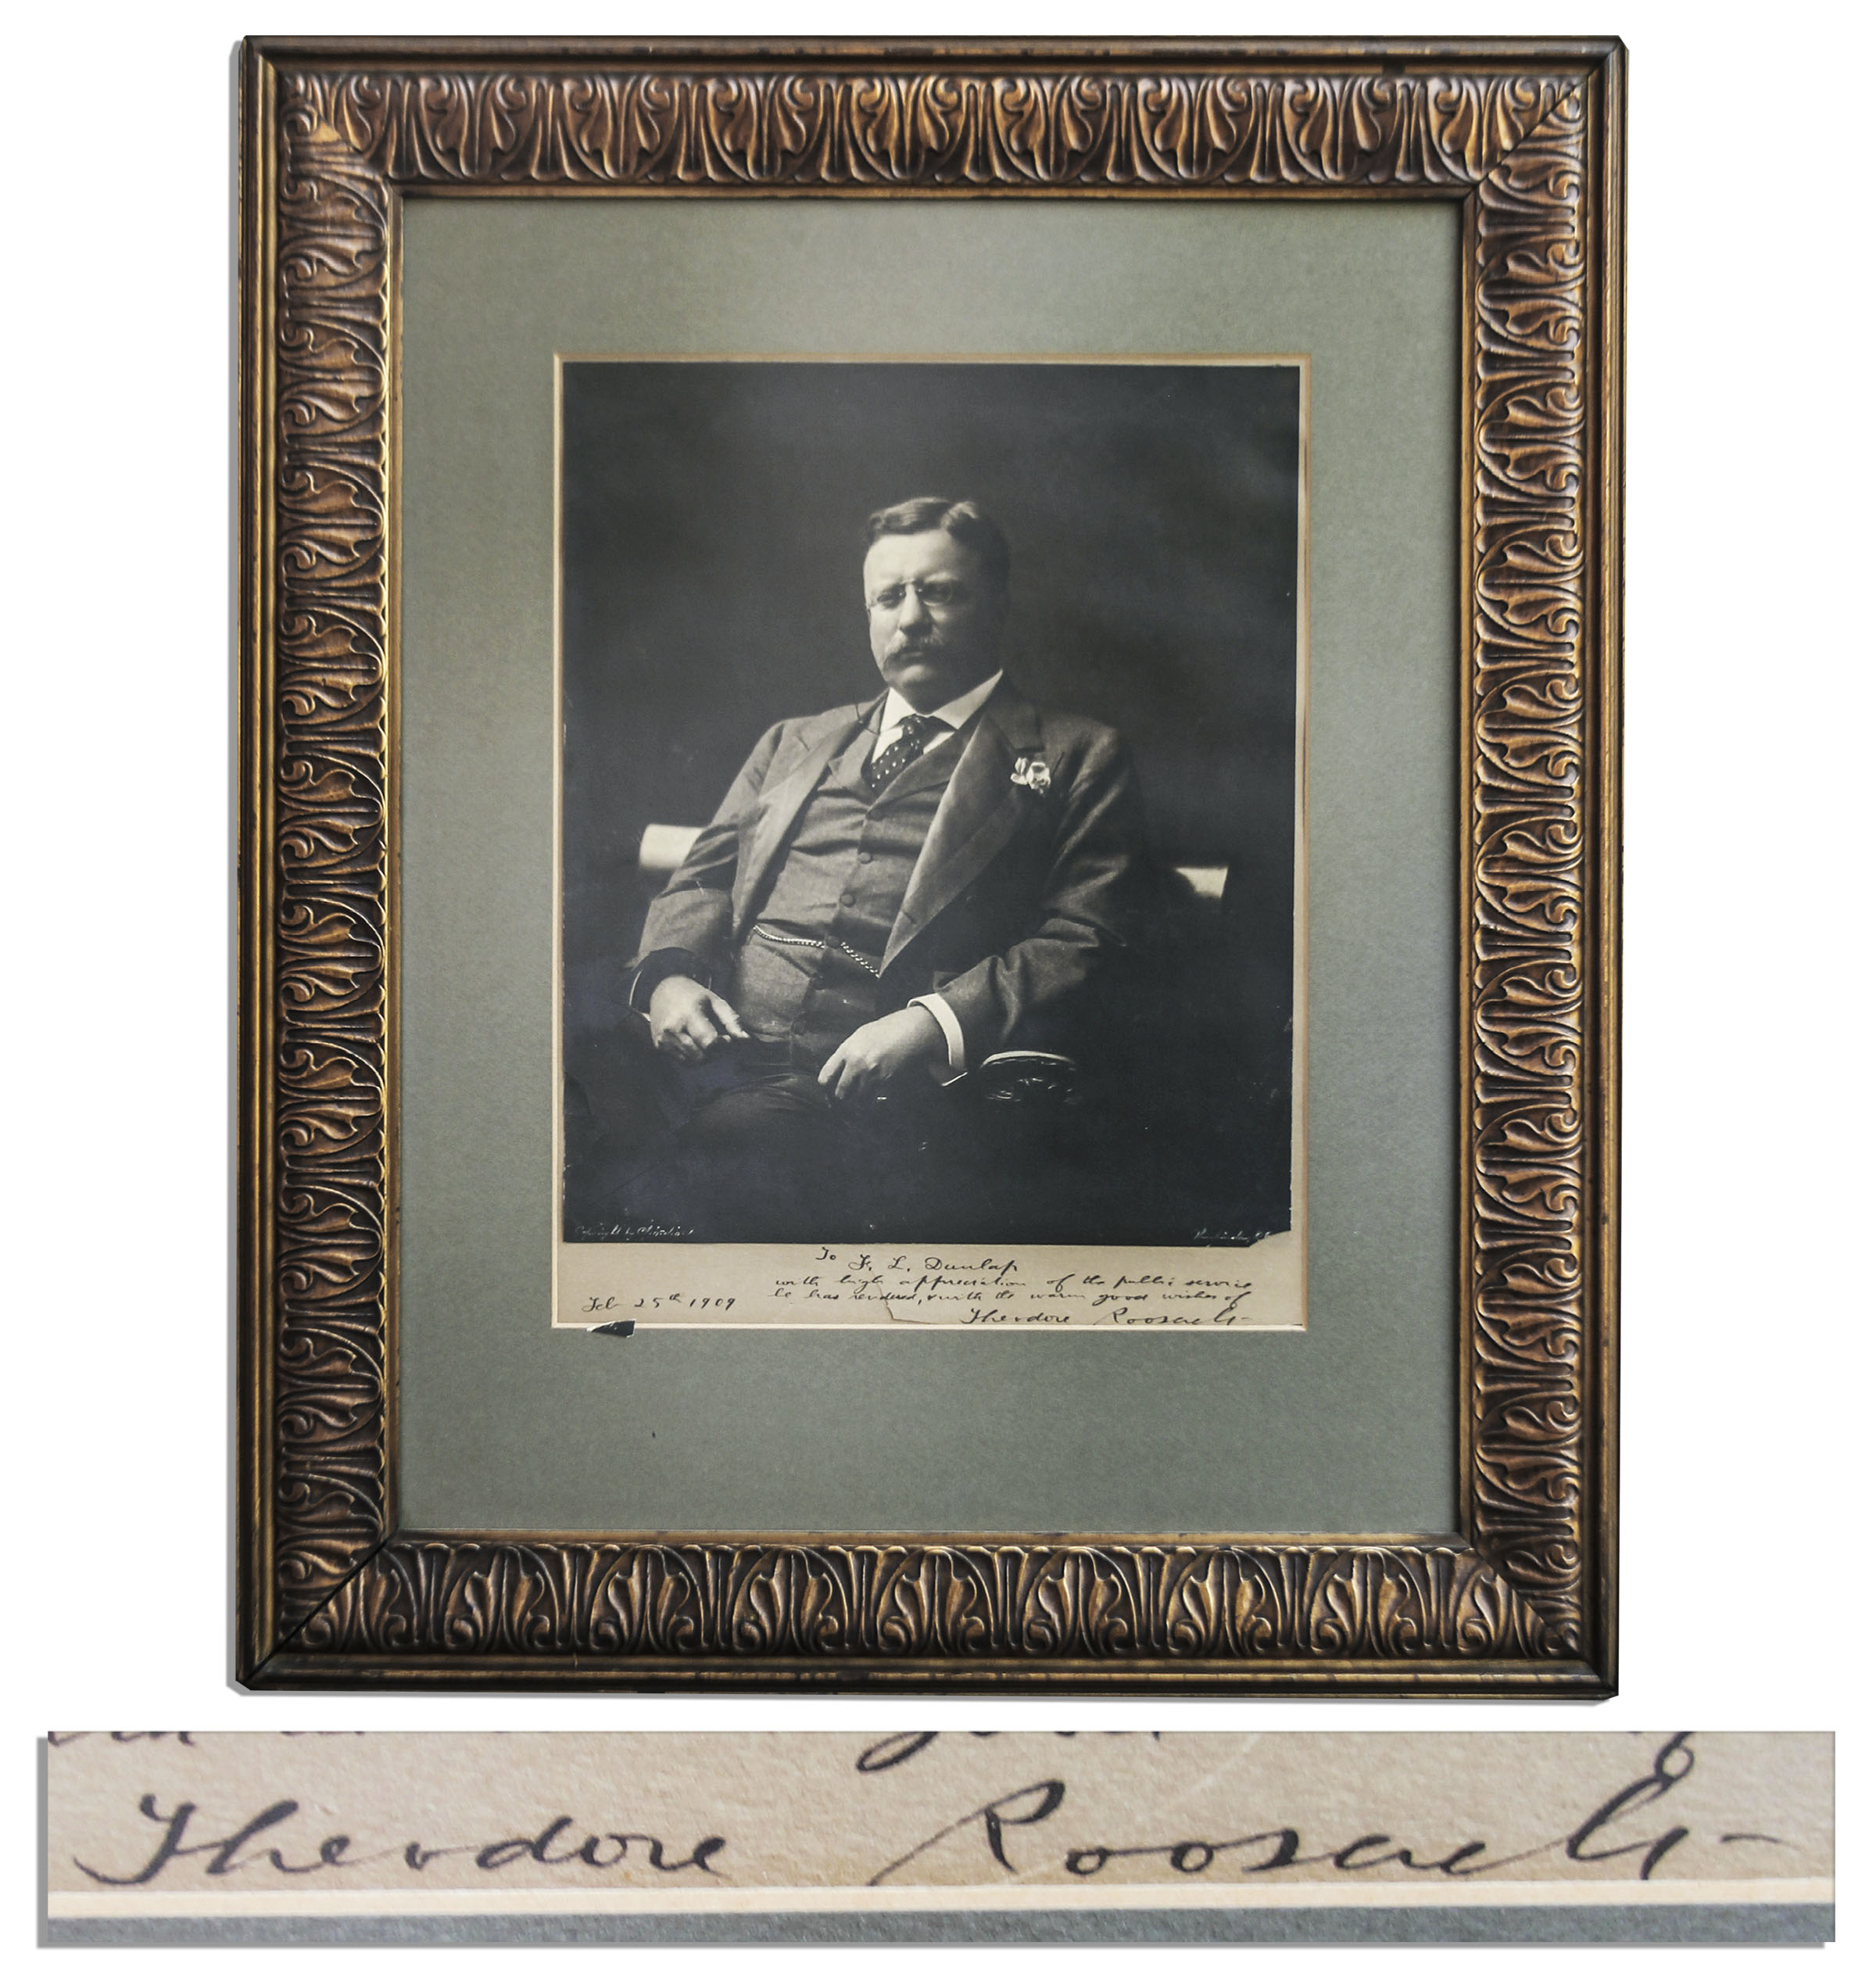 THEODORE ROOSEVELT 8" x 10" Photograph With Autograph RP